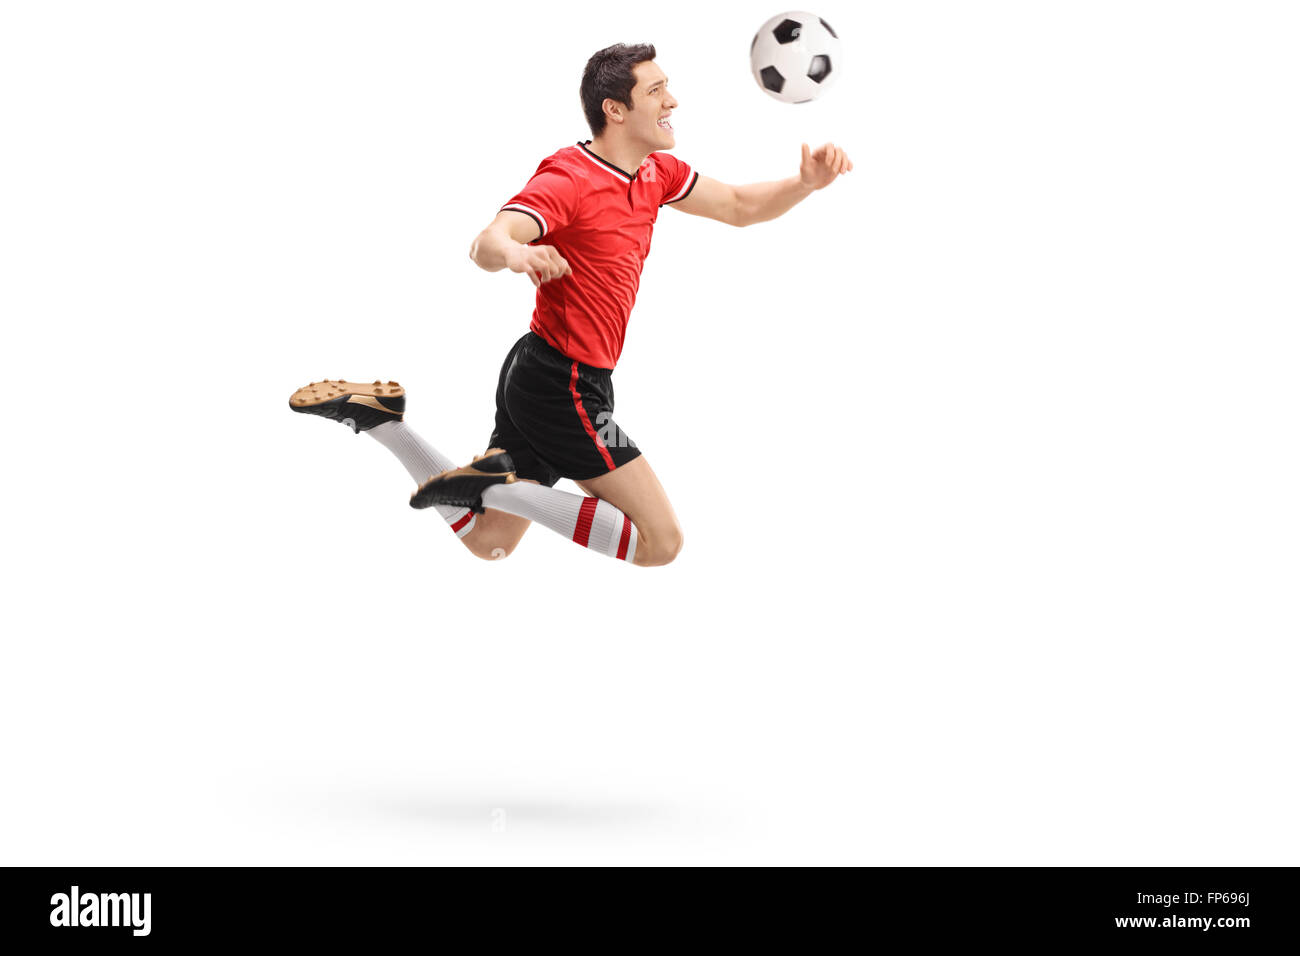 Studio shot of a young football player heading a ball shot in mid-air isolated on white background Stock Photo